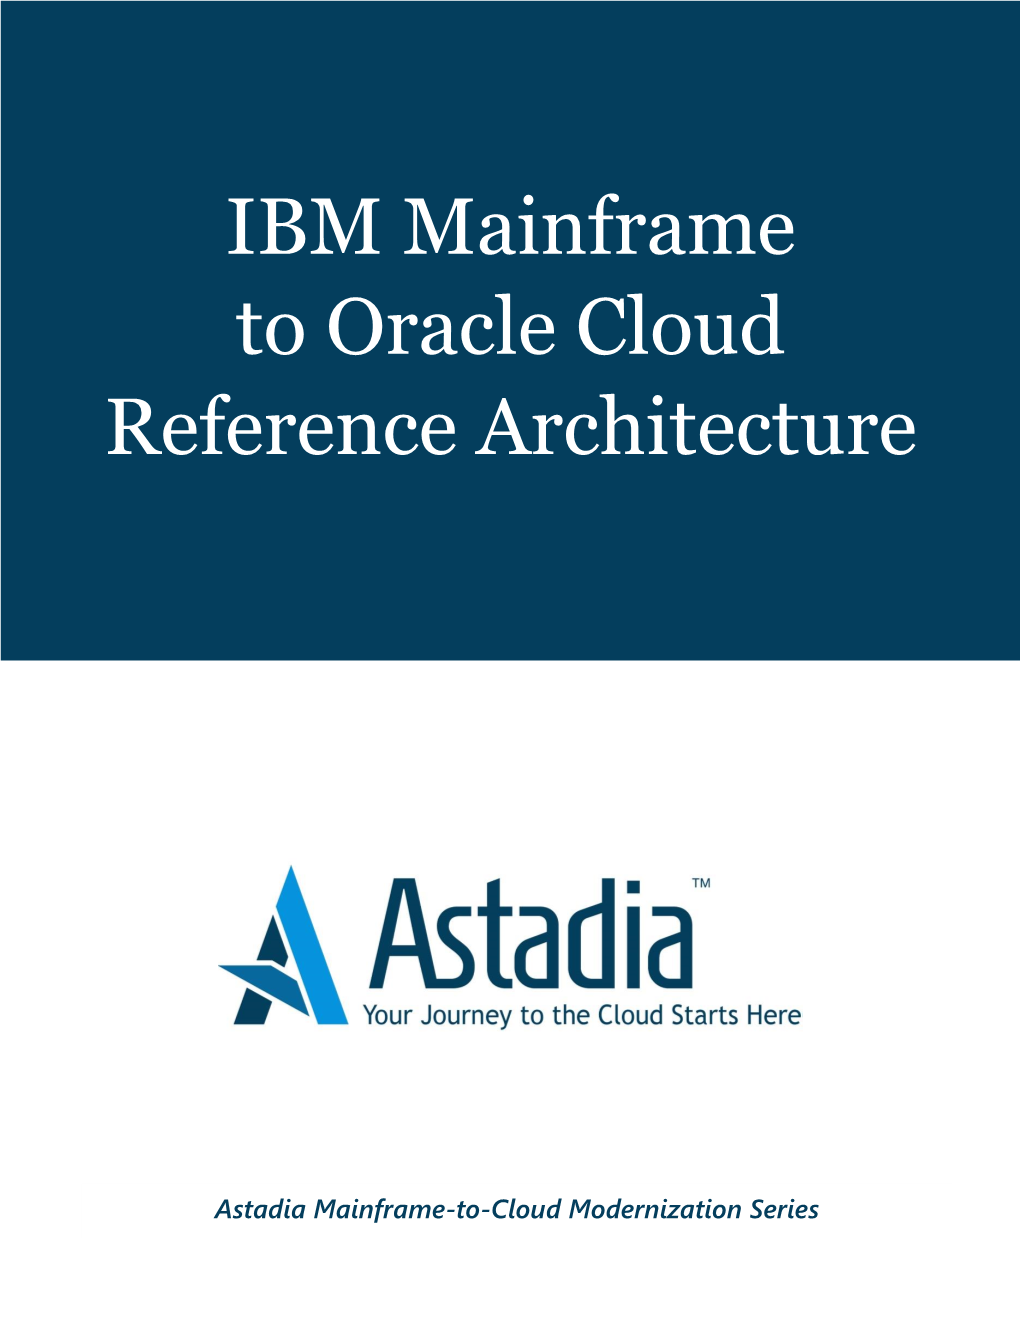 IBM Mainframe to Oracle Cloud Reference Architecture